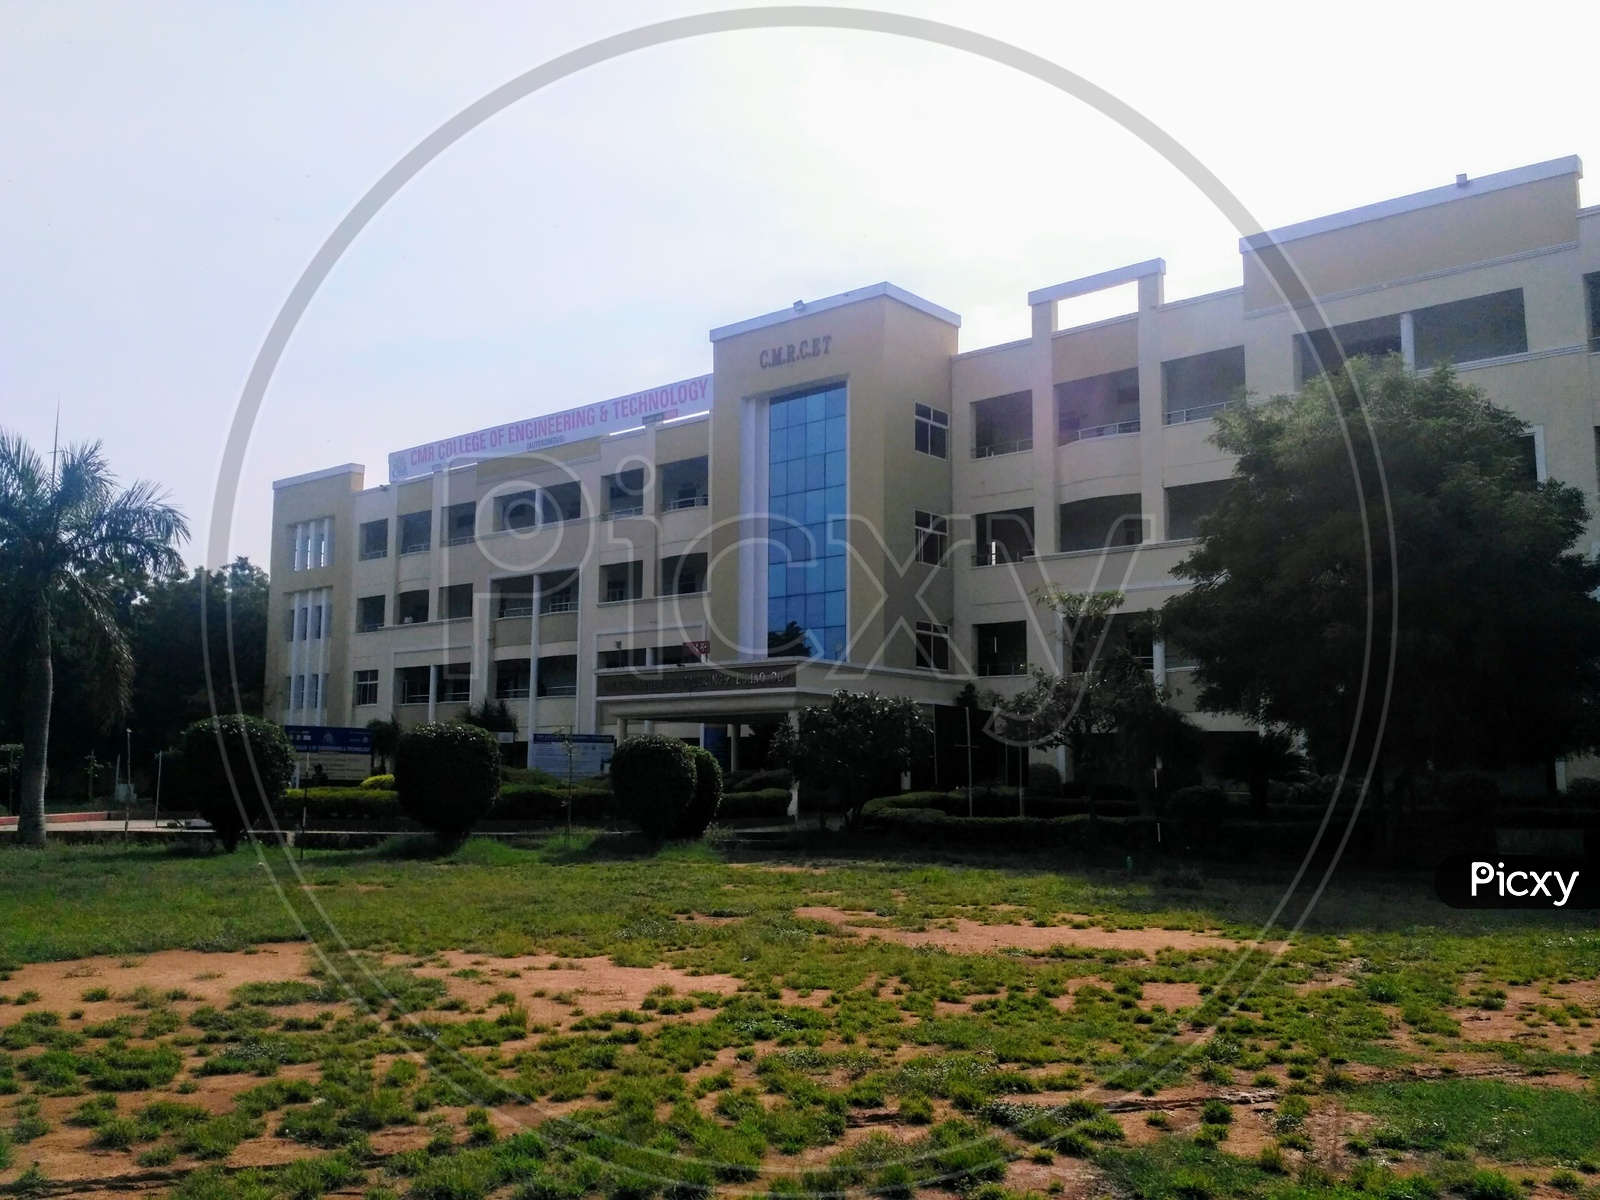 CMR College Of Engineering and Technology